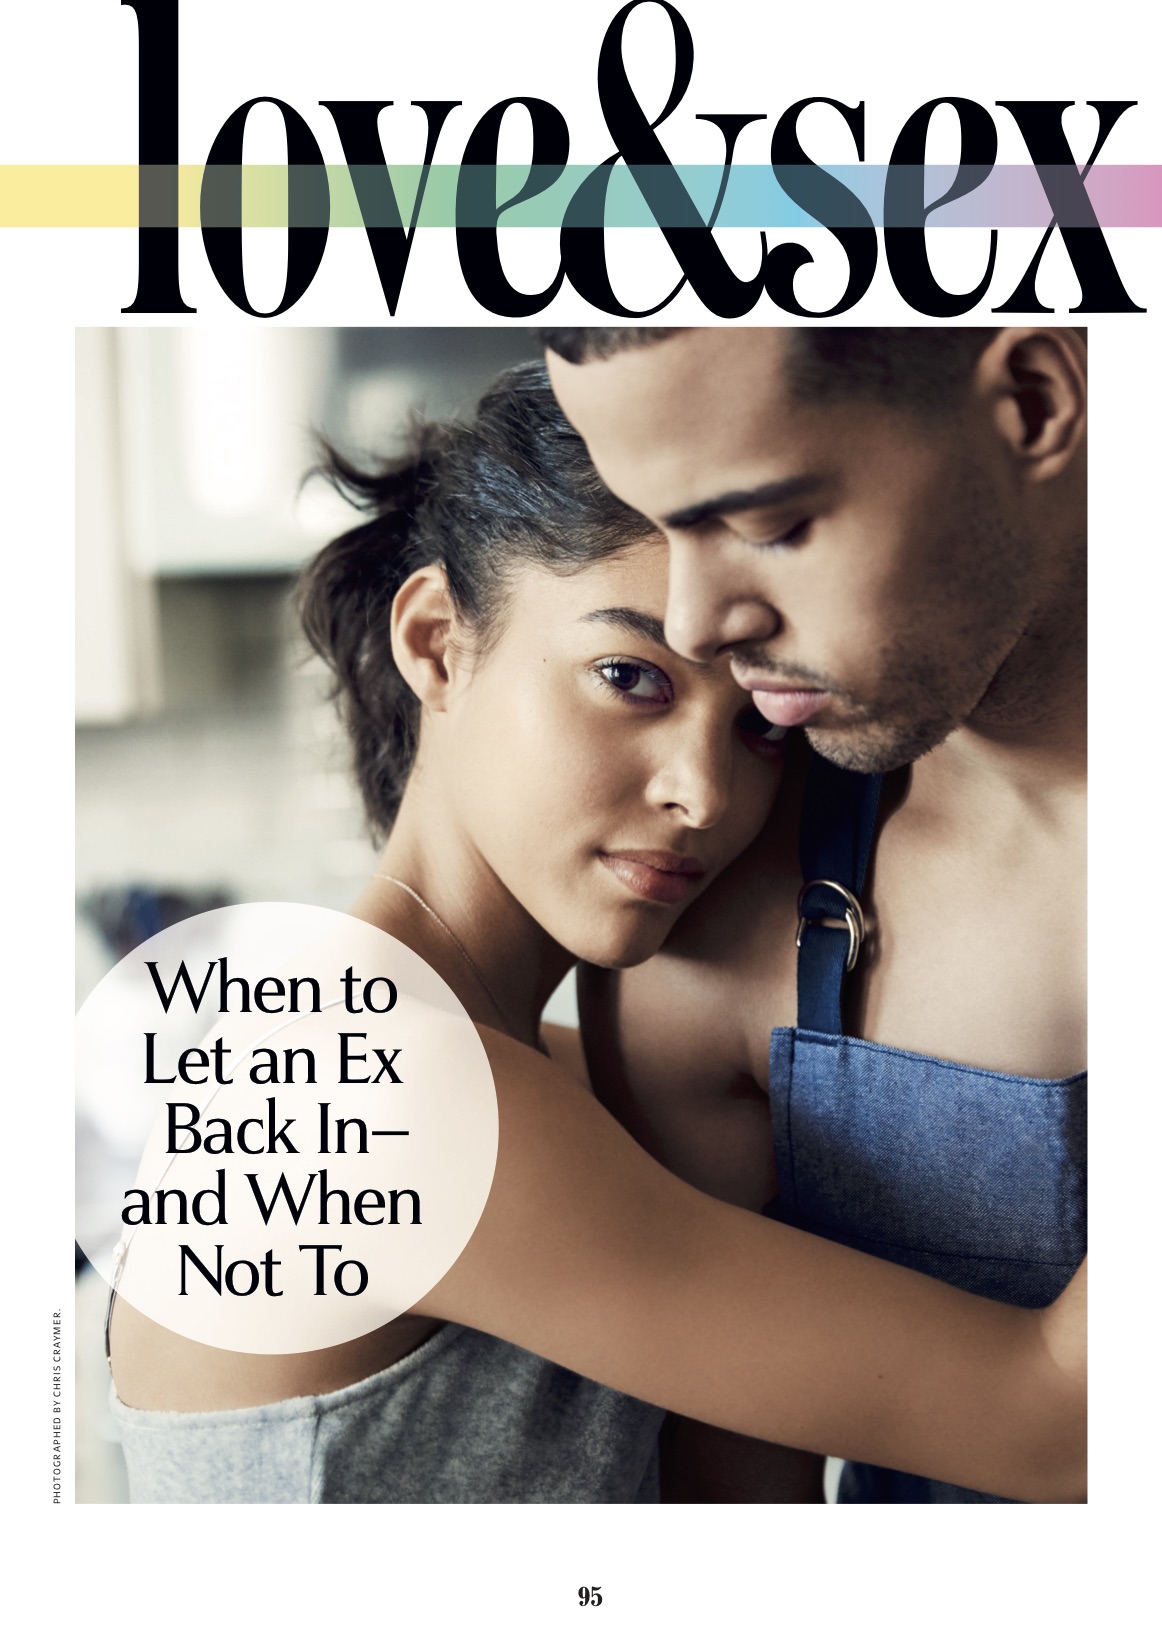 Cosmopolitan: When To Let an Ex Back In and When Not To